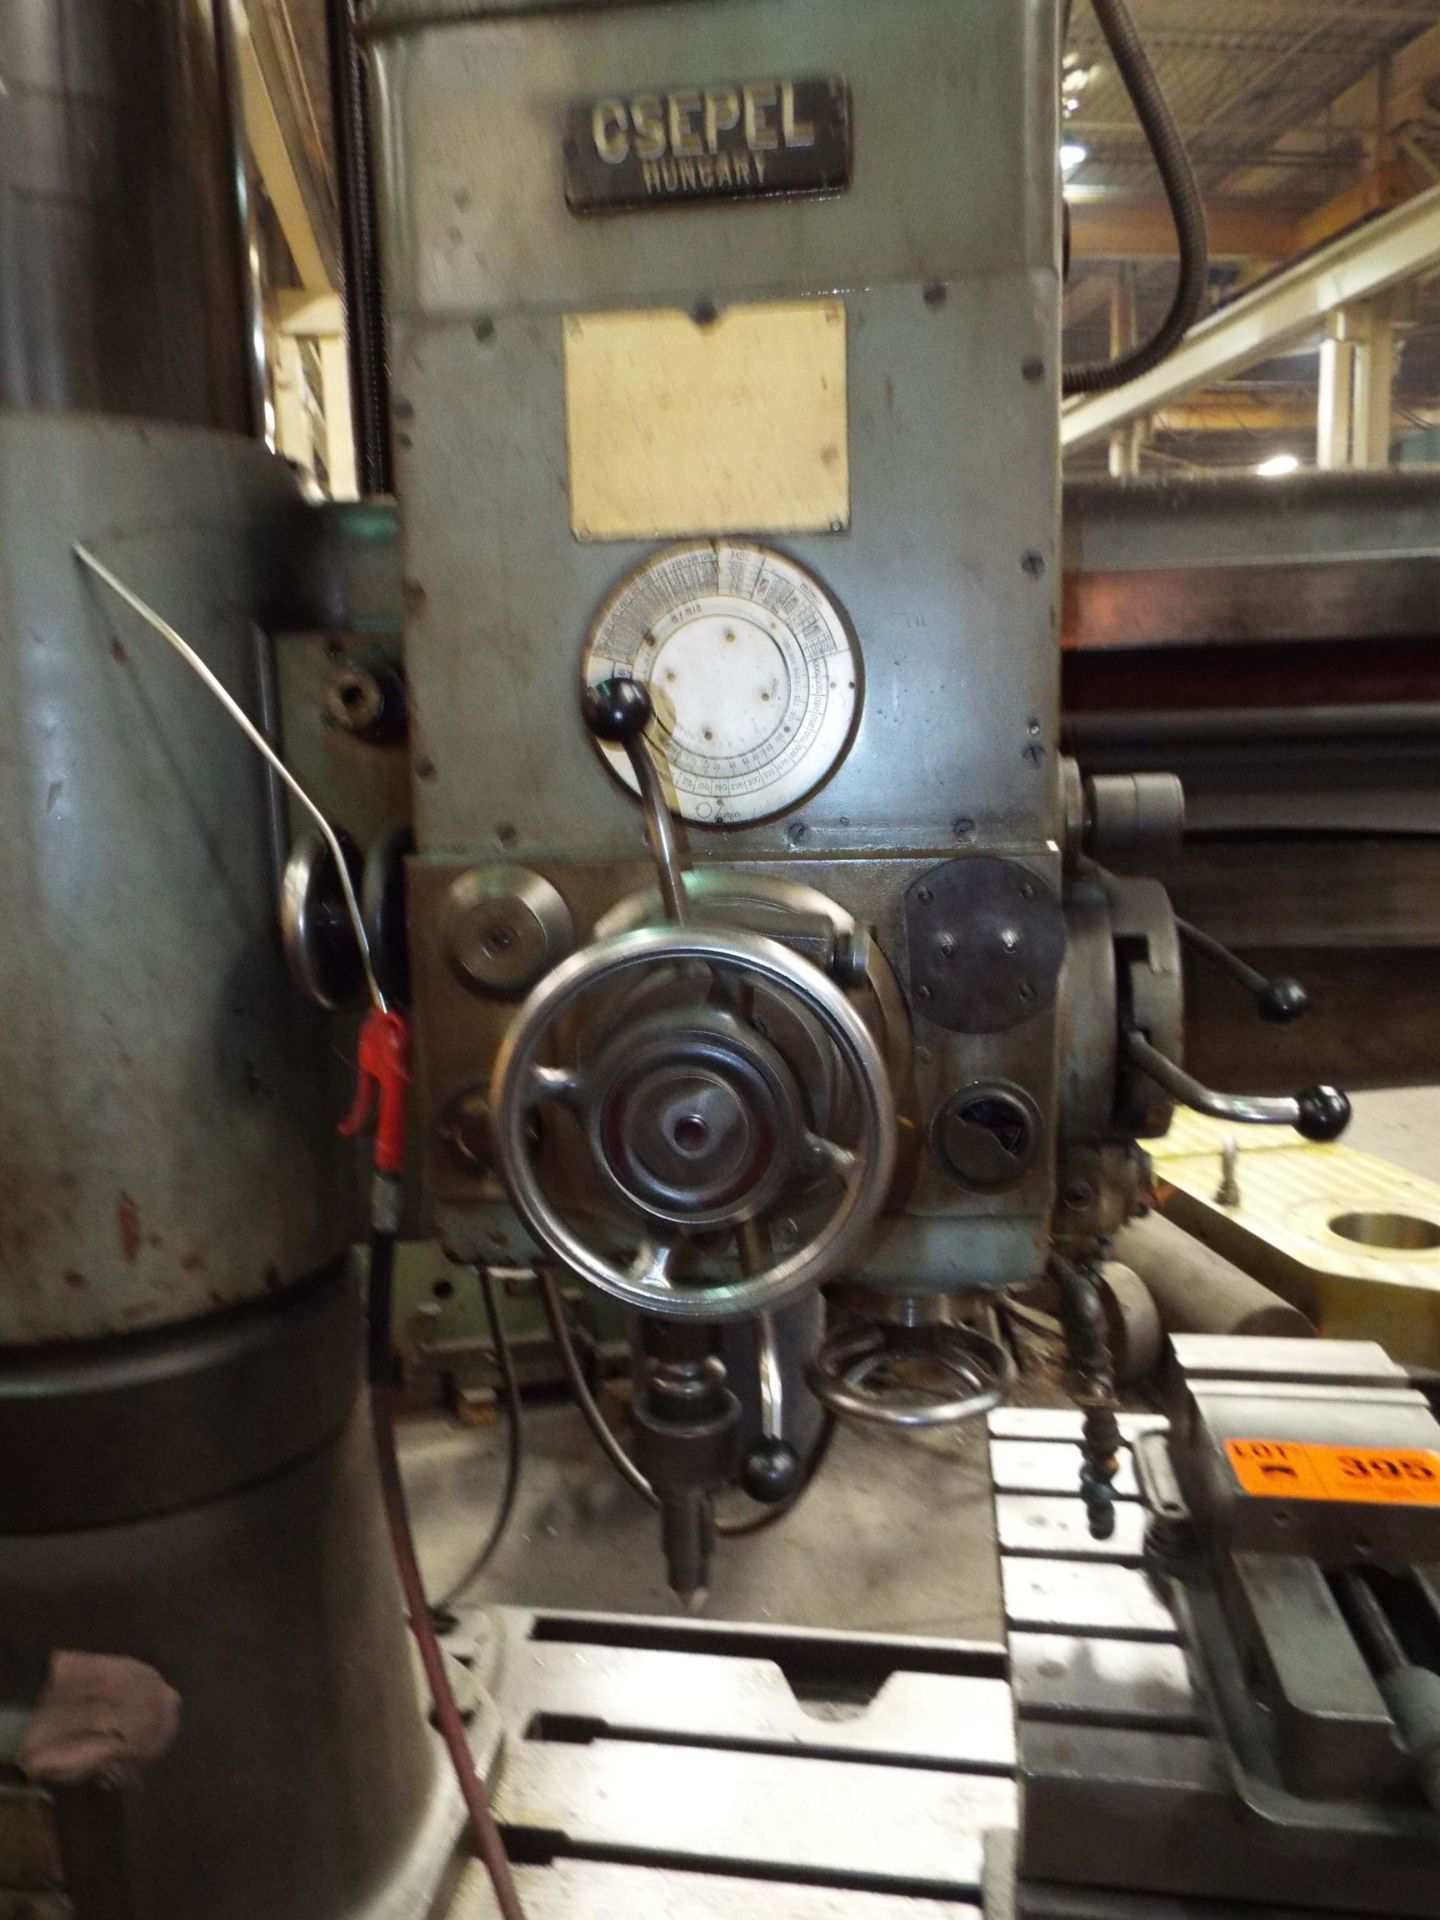 CSEPEL RFH75/1750 5' RADIAL ARM DRILL WITH SPEEDS TO 1900 RPM, S/N: 72087 (CI) (LOCATED AT 215 - Image 4 of 5